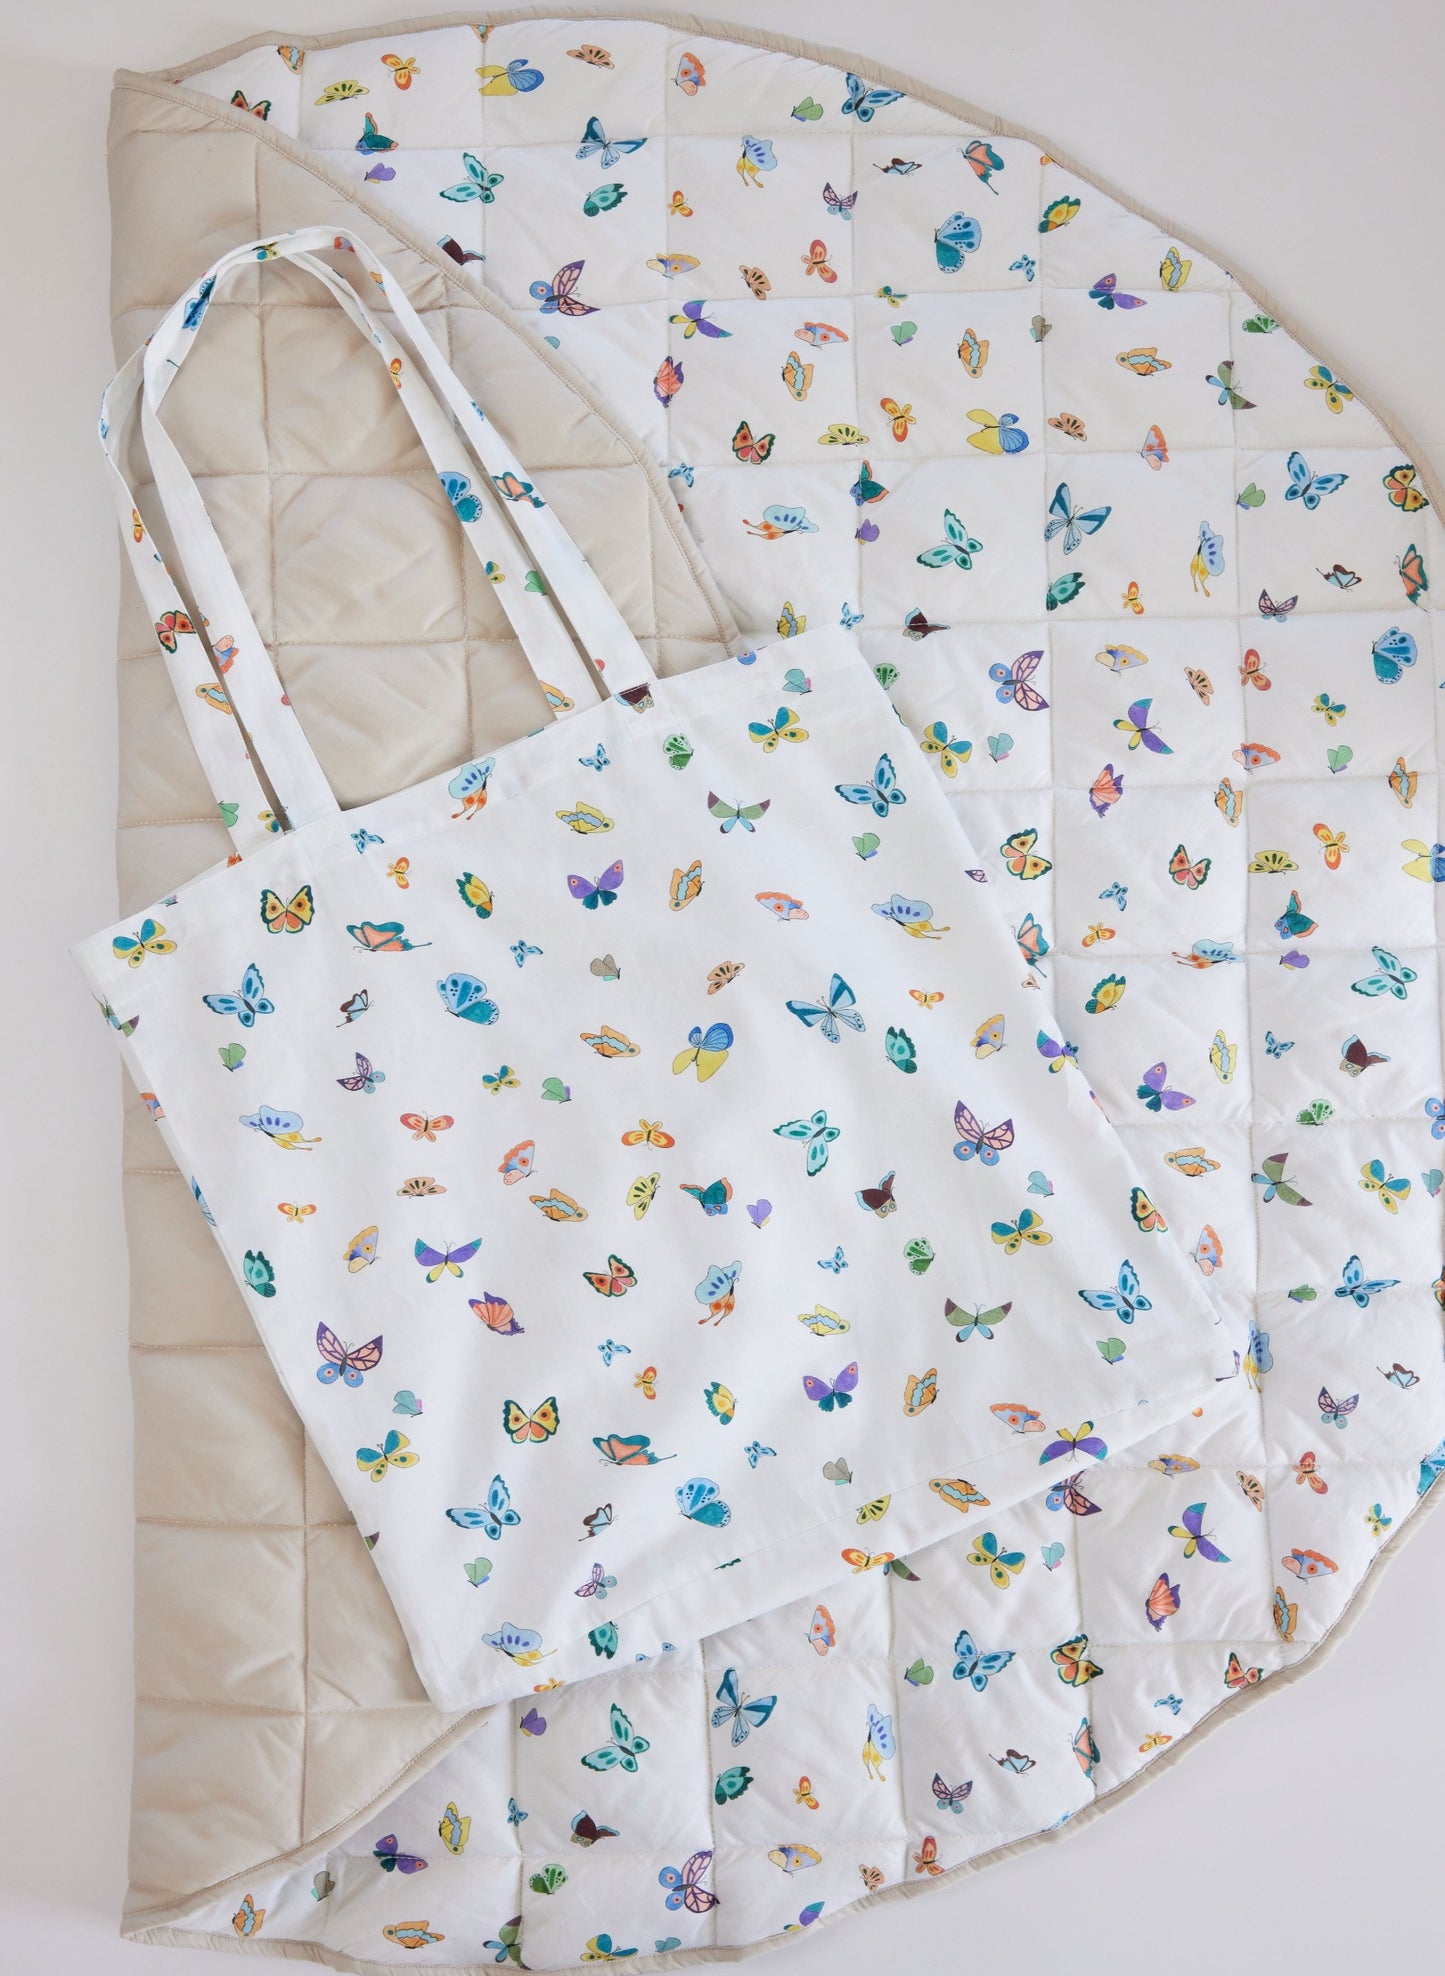 Madame Butterfly Play Mat and Tote